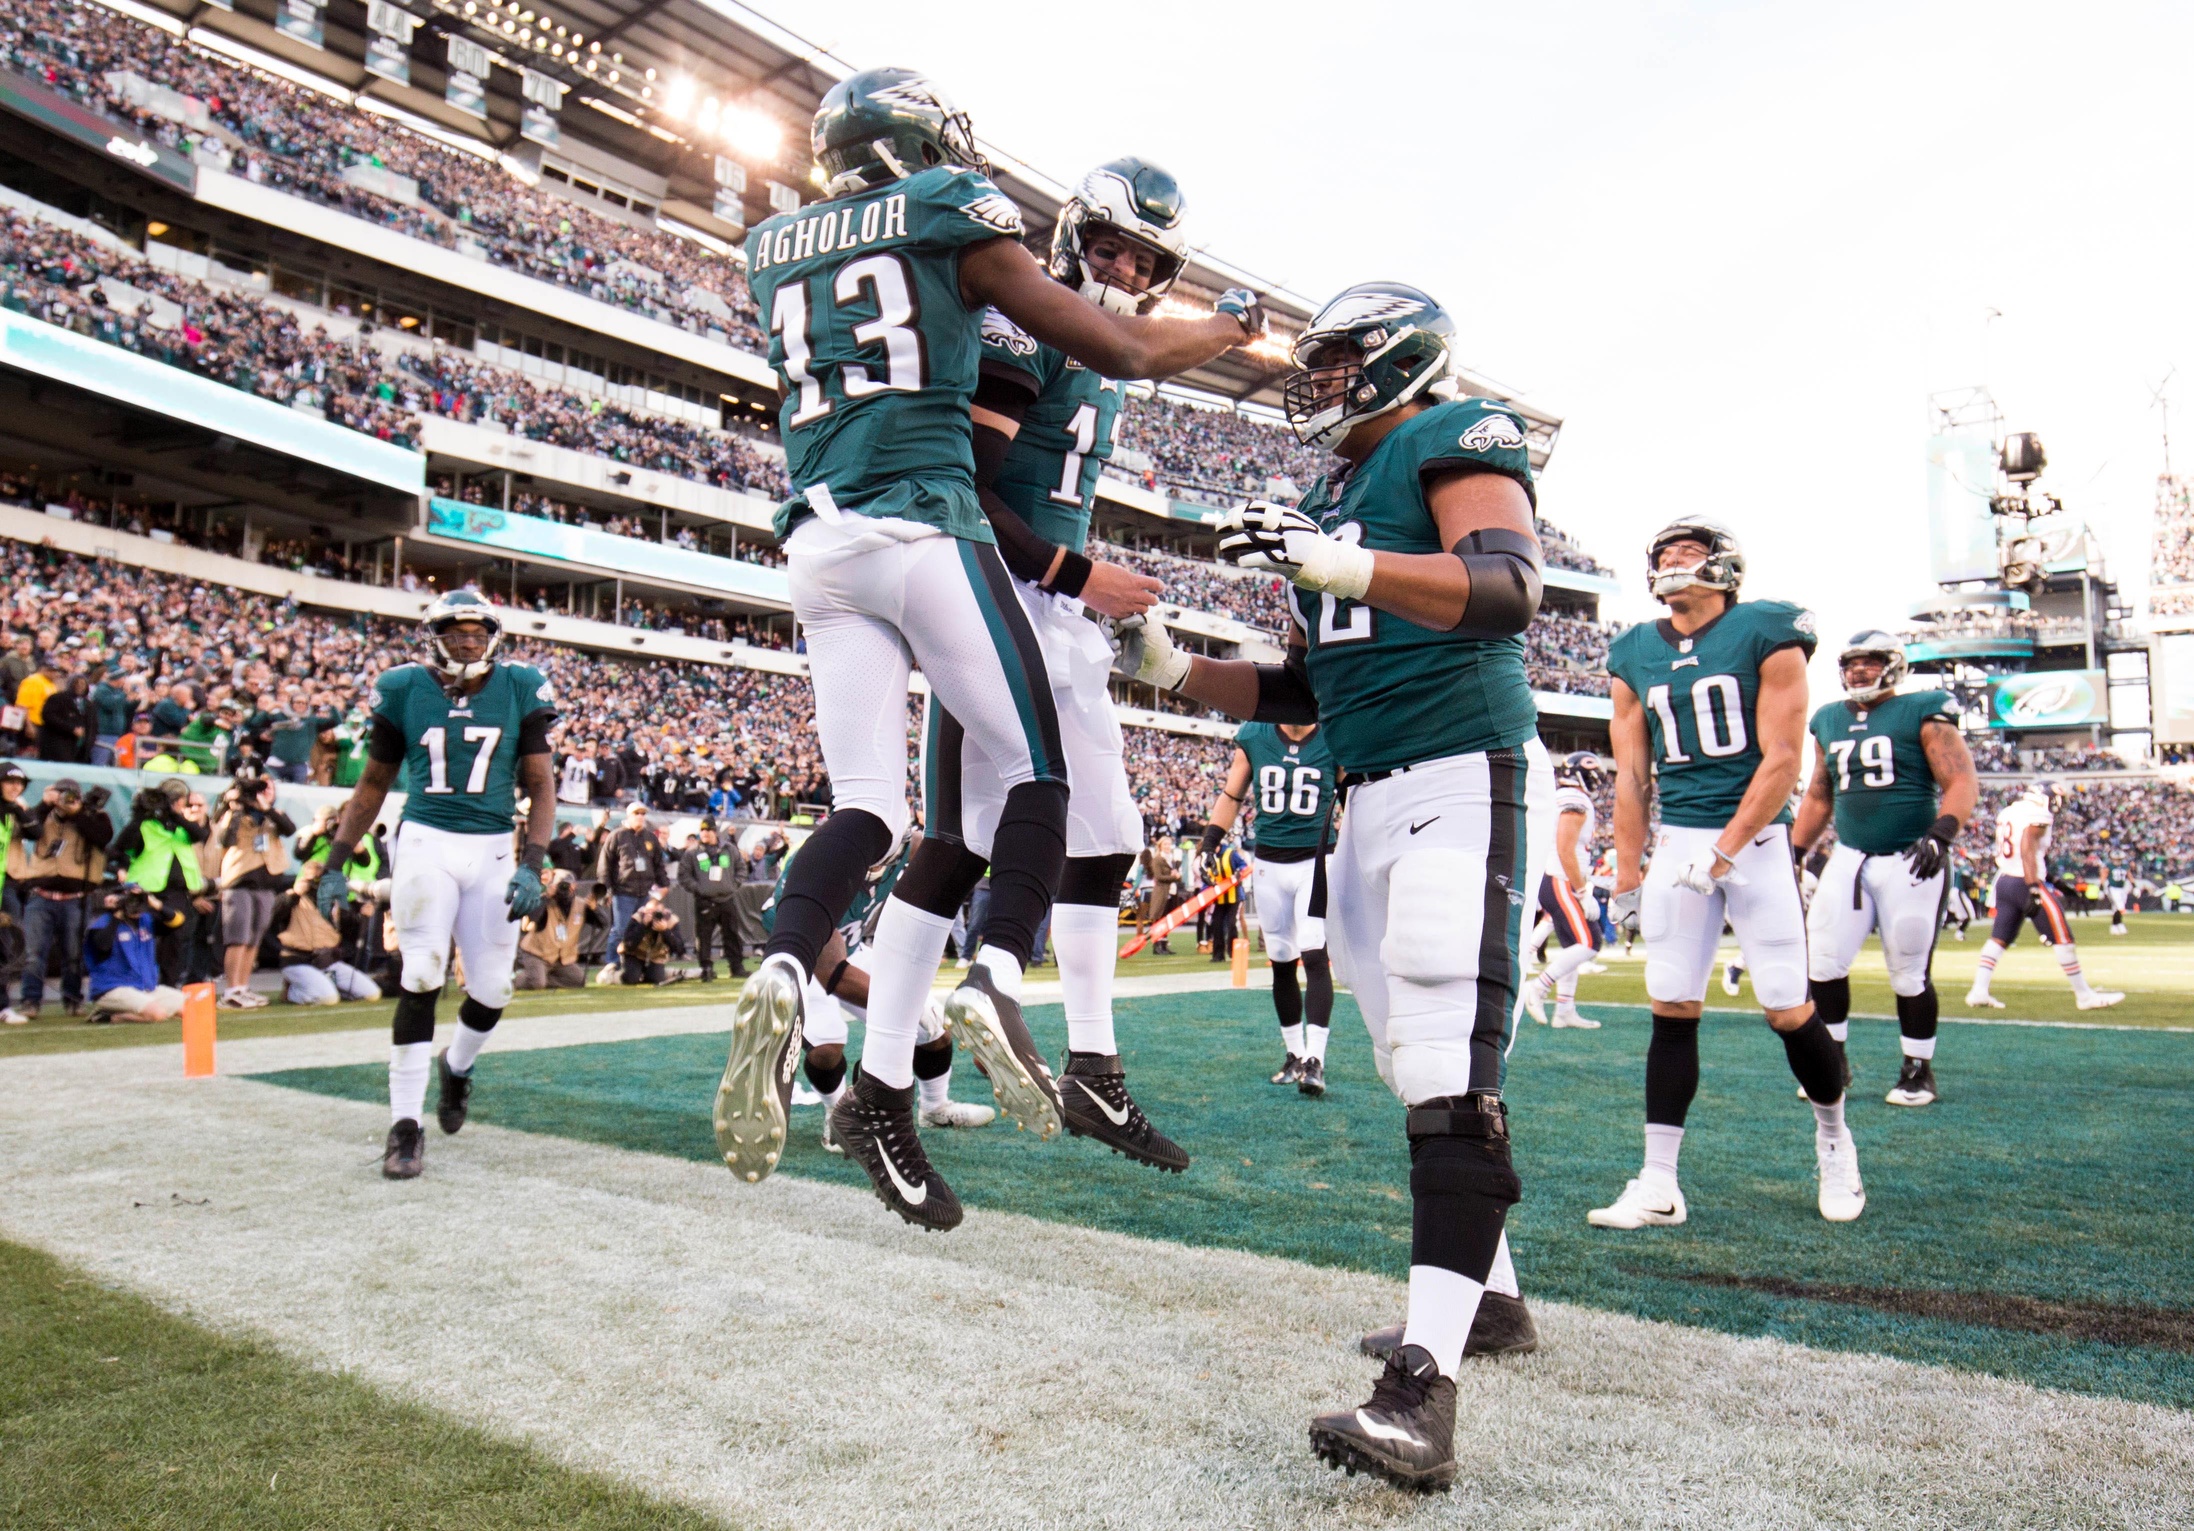 Eagles Modestly Release Playoff Ticket Information